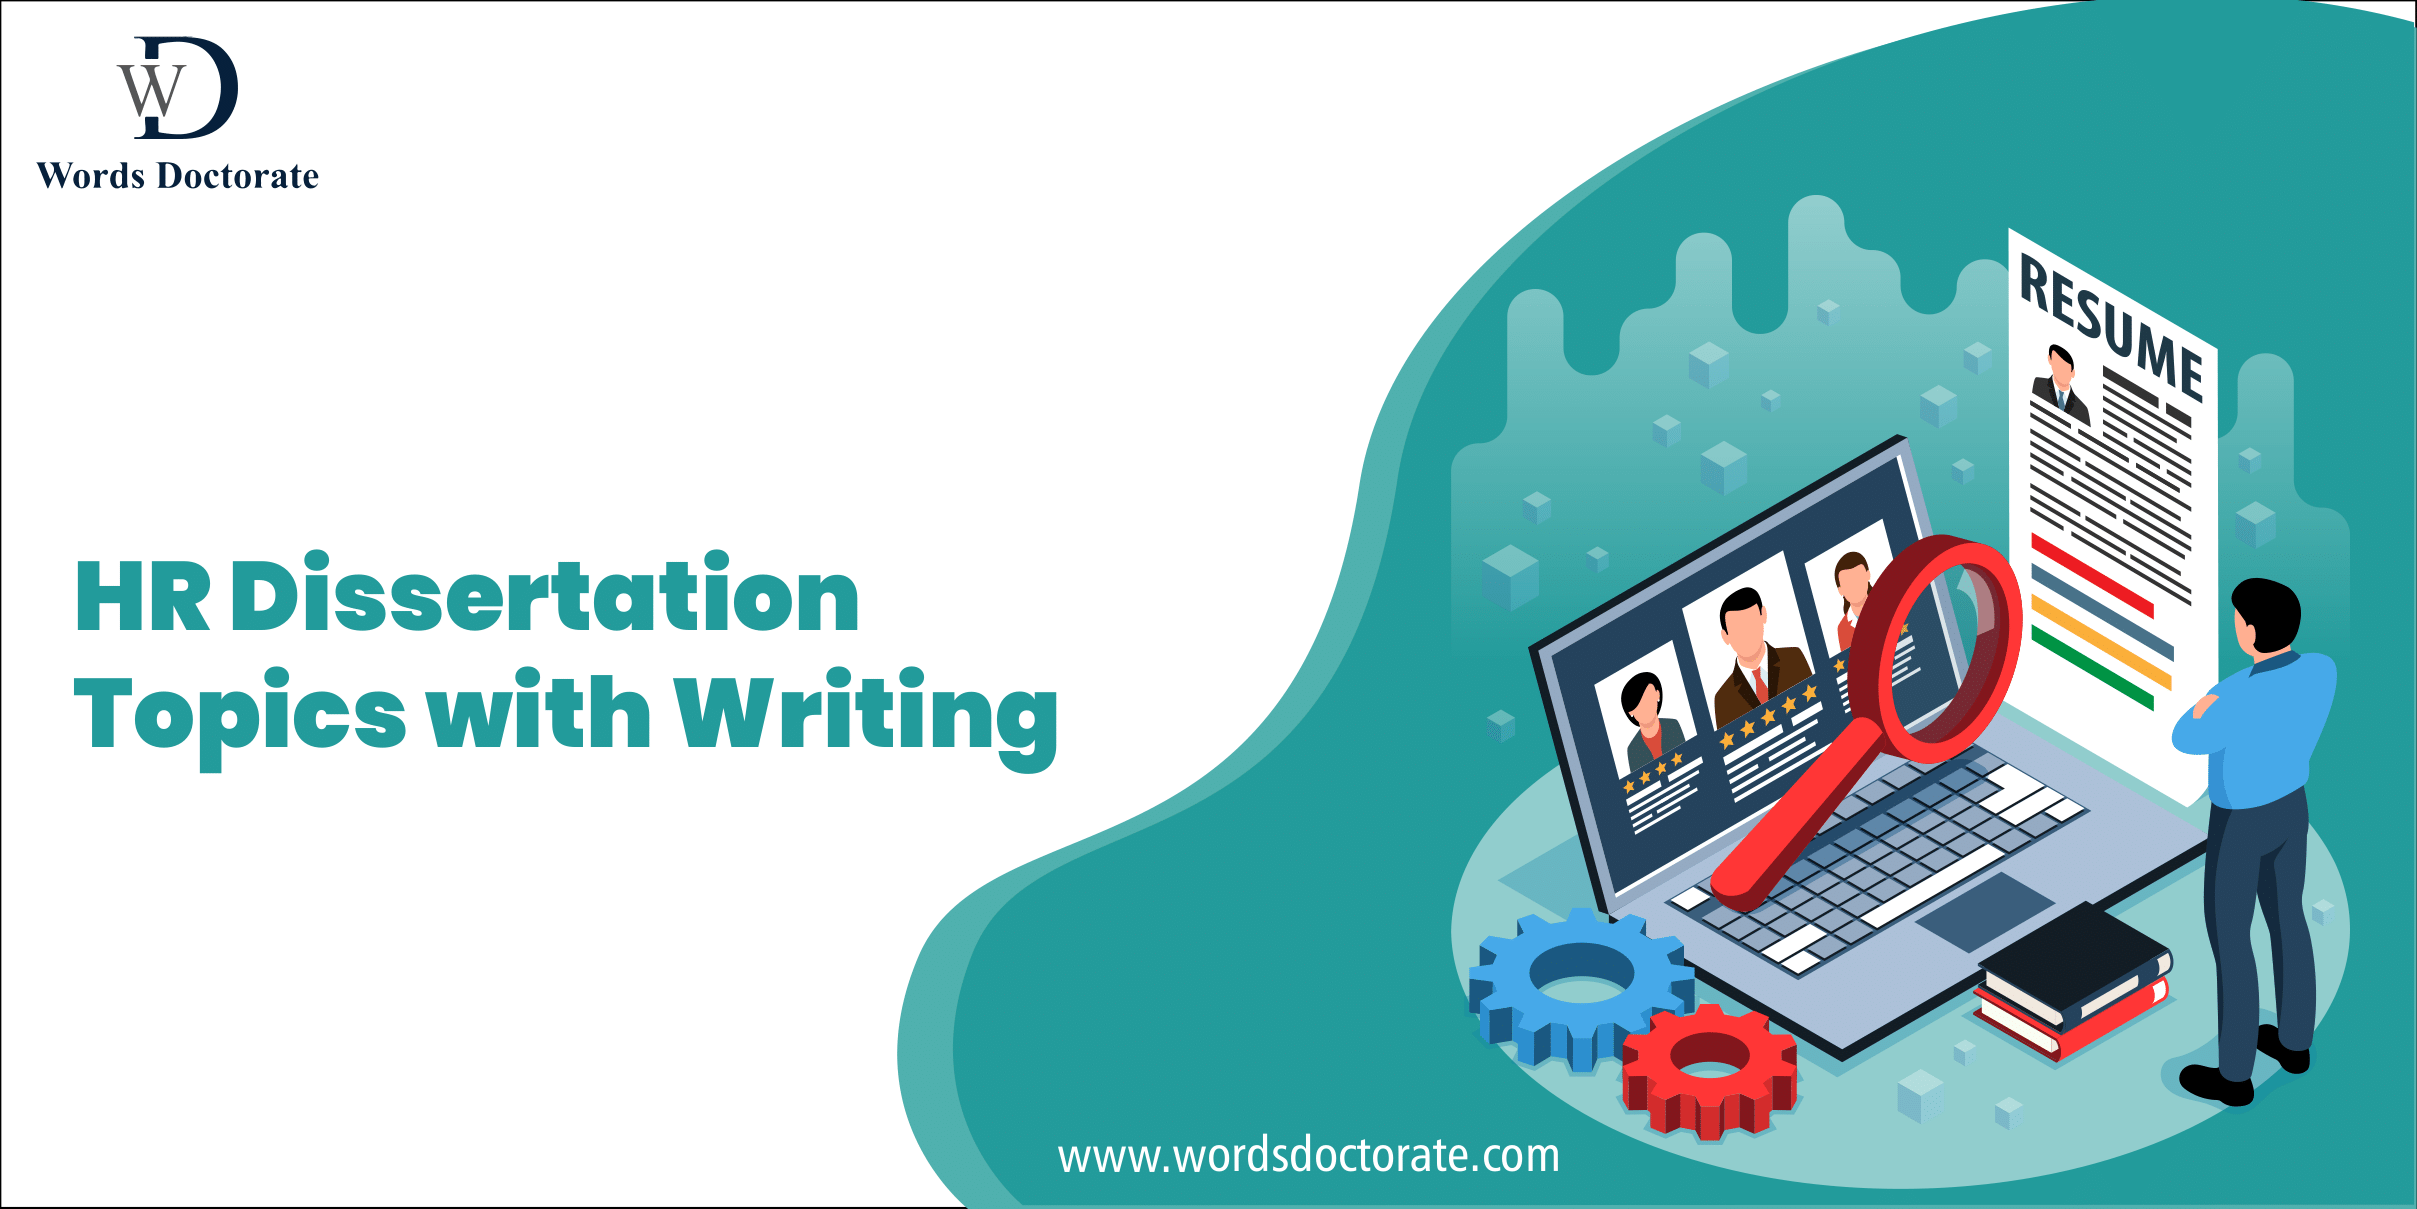 HR Dissertation Topics with Writing